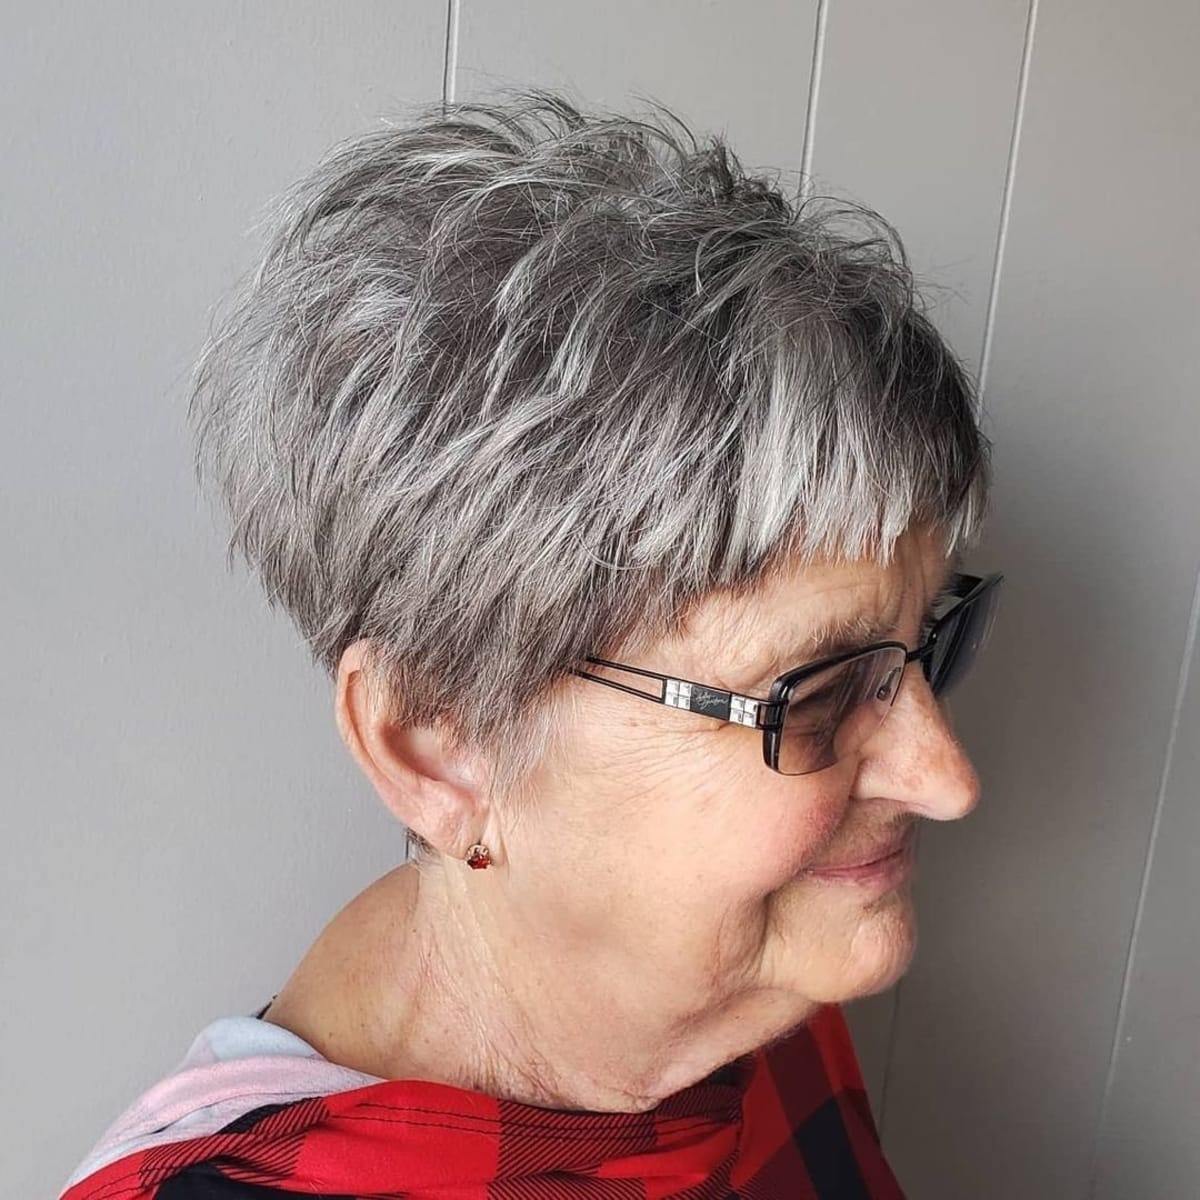 21 Most Flattering Pixie Cuts for Older Ladies with Glasses